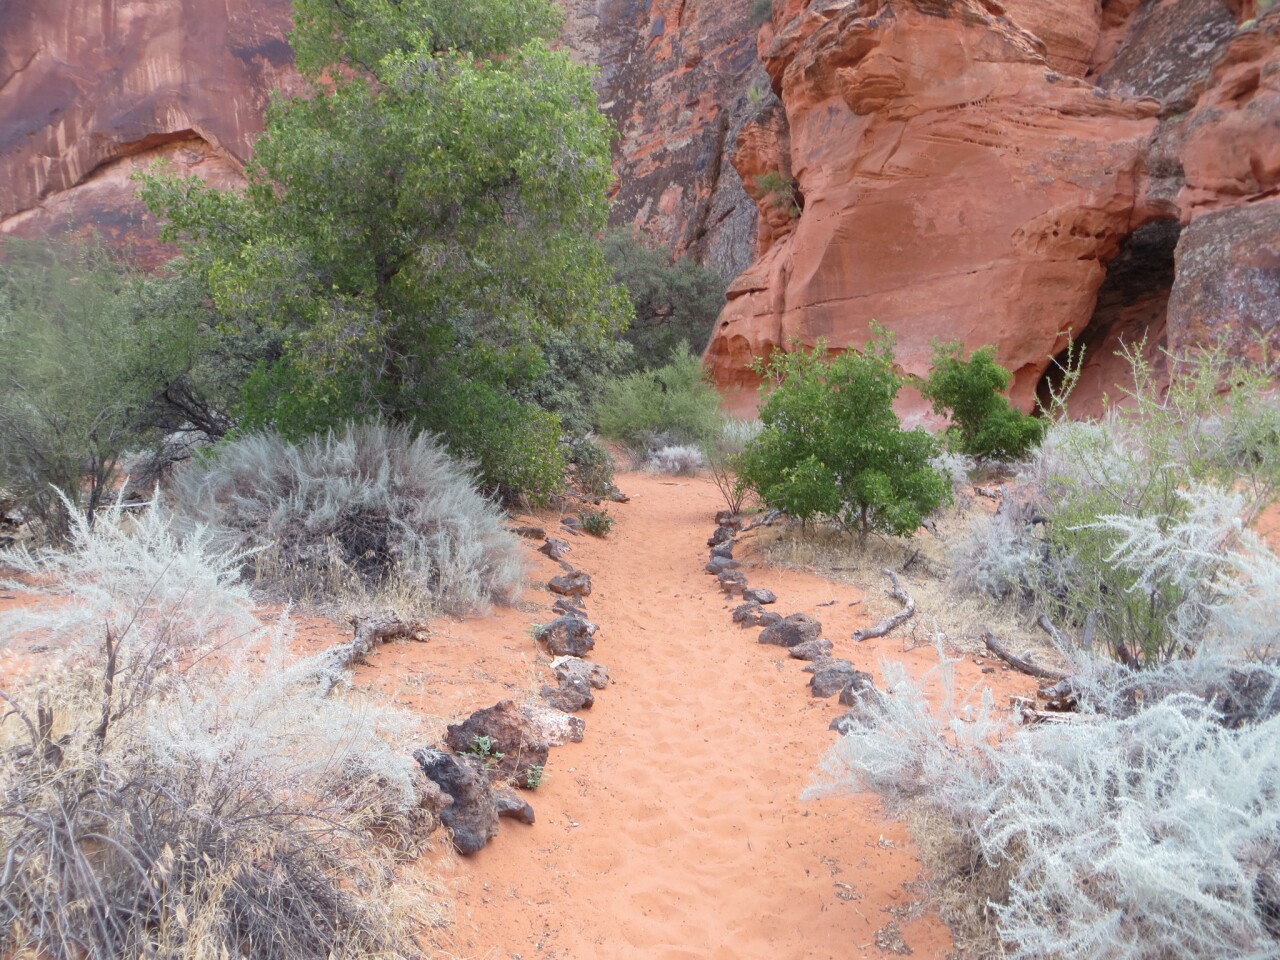 Sage and other desert flora provide fragrant aromas on a hike in Snow Canyon State Park.